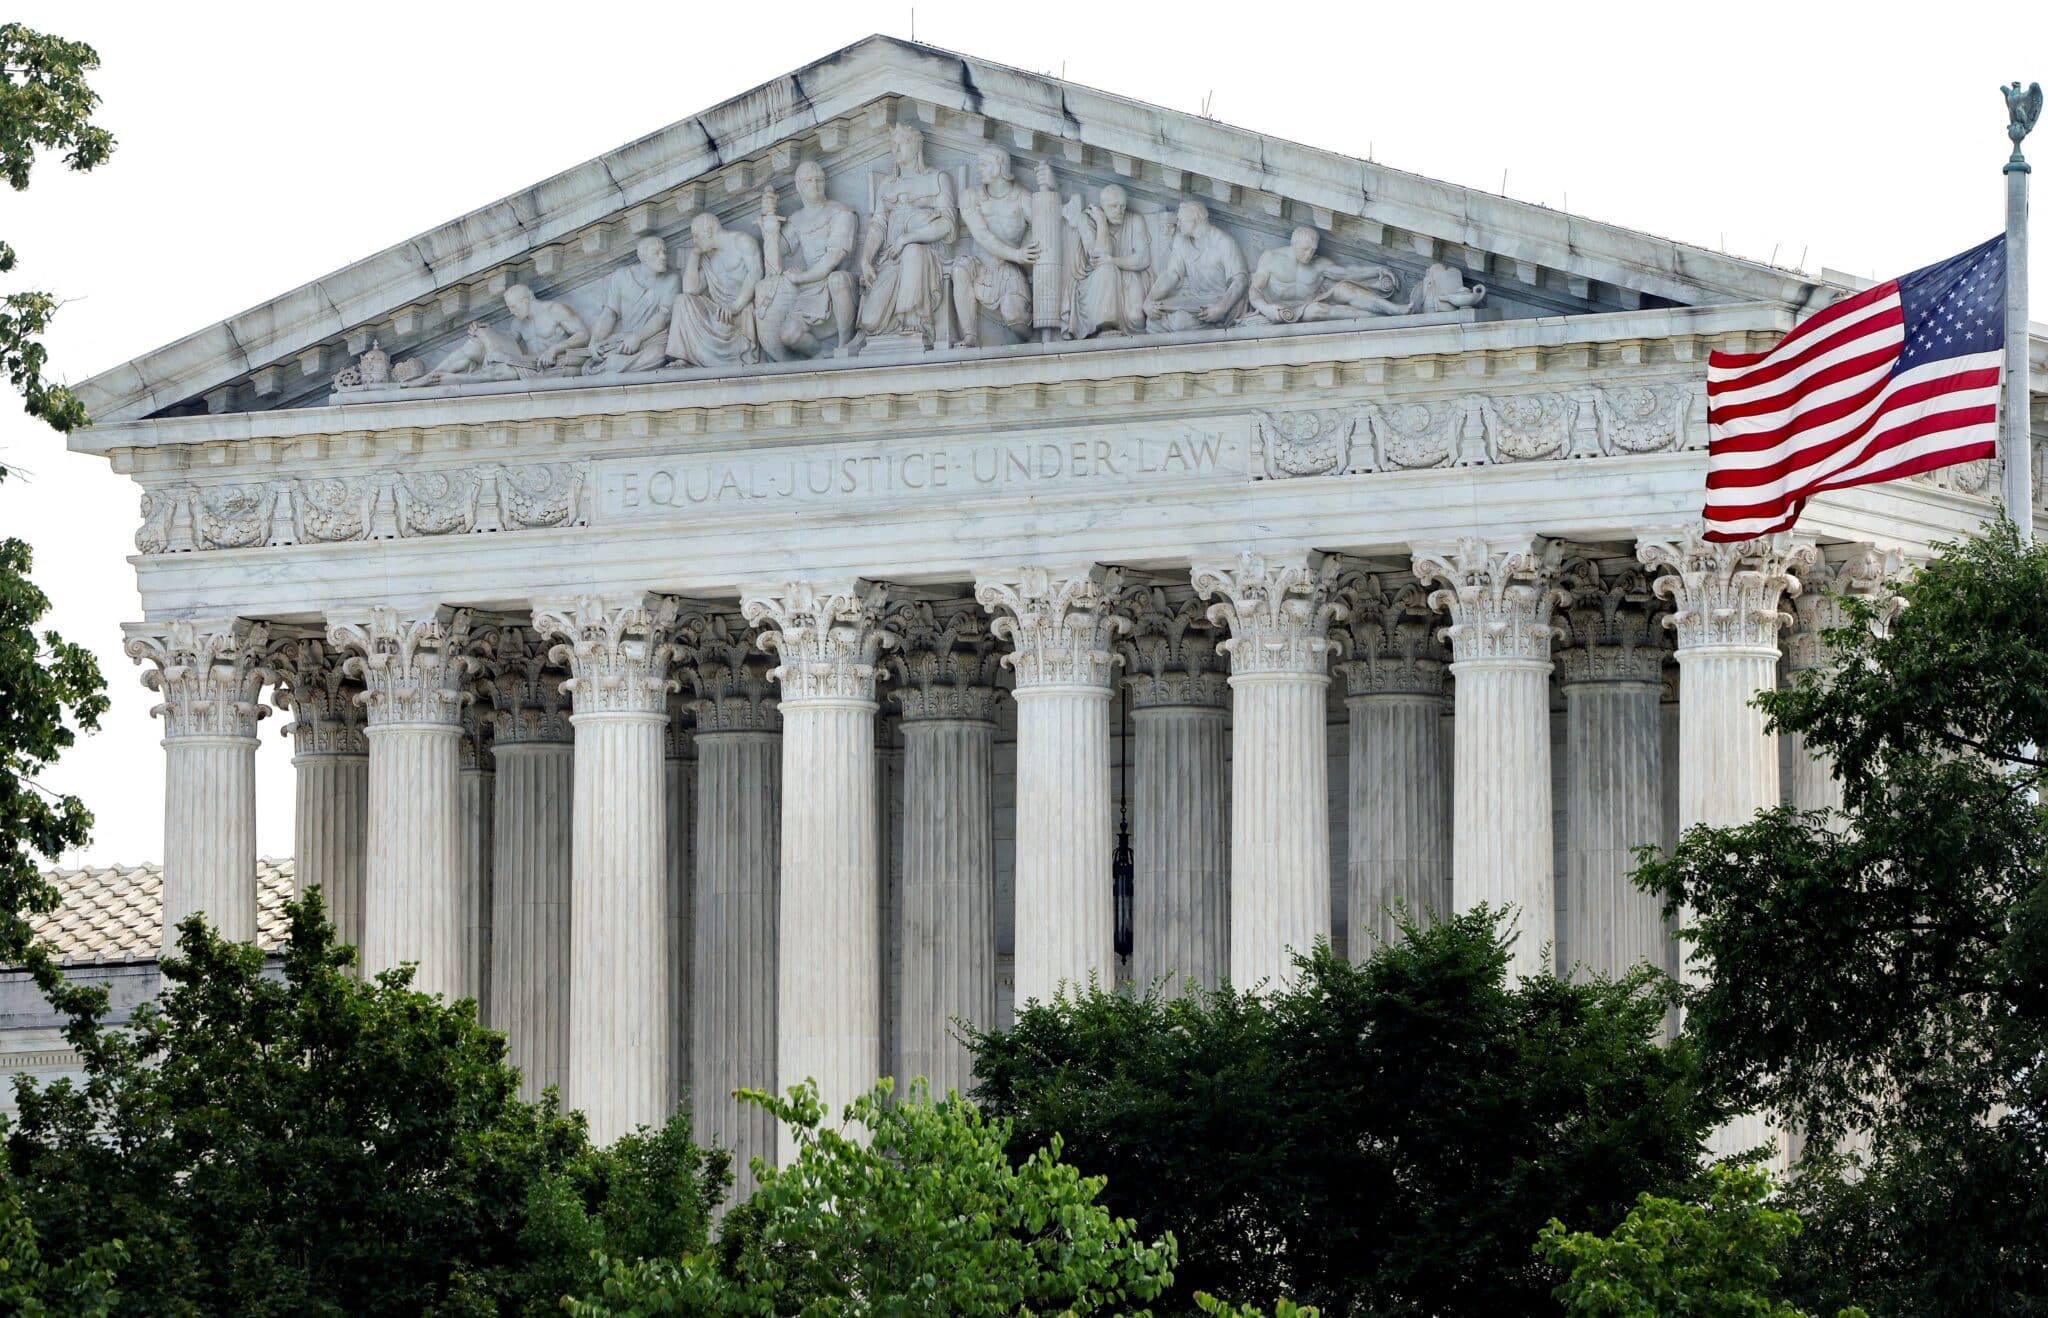 The U.S. Supreme Court building in Washington is seen June 17, 2024. The Supreme Court on June 27, 2024, dismissed a case concerning emergency abortions in Idaho, sending the case back to lower courts without resolving the central question about conflicting state and federal laws. (OSV News photo/Evelyn Hockstein, Reuters)